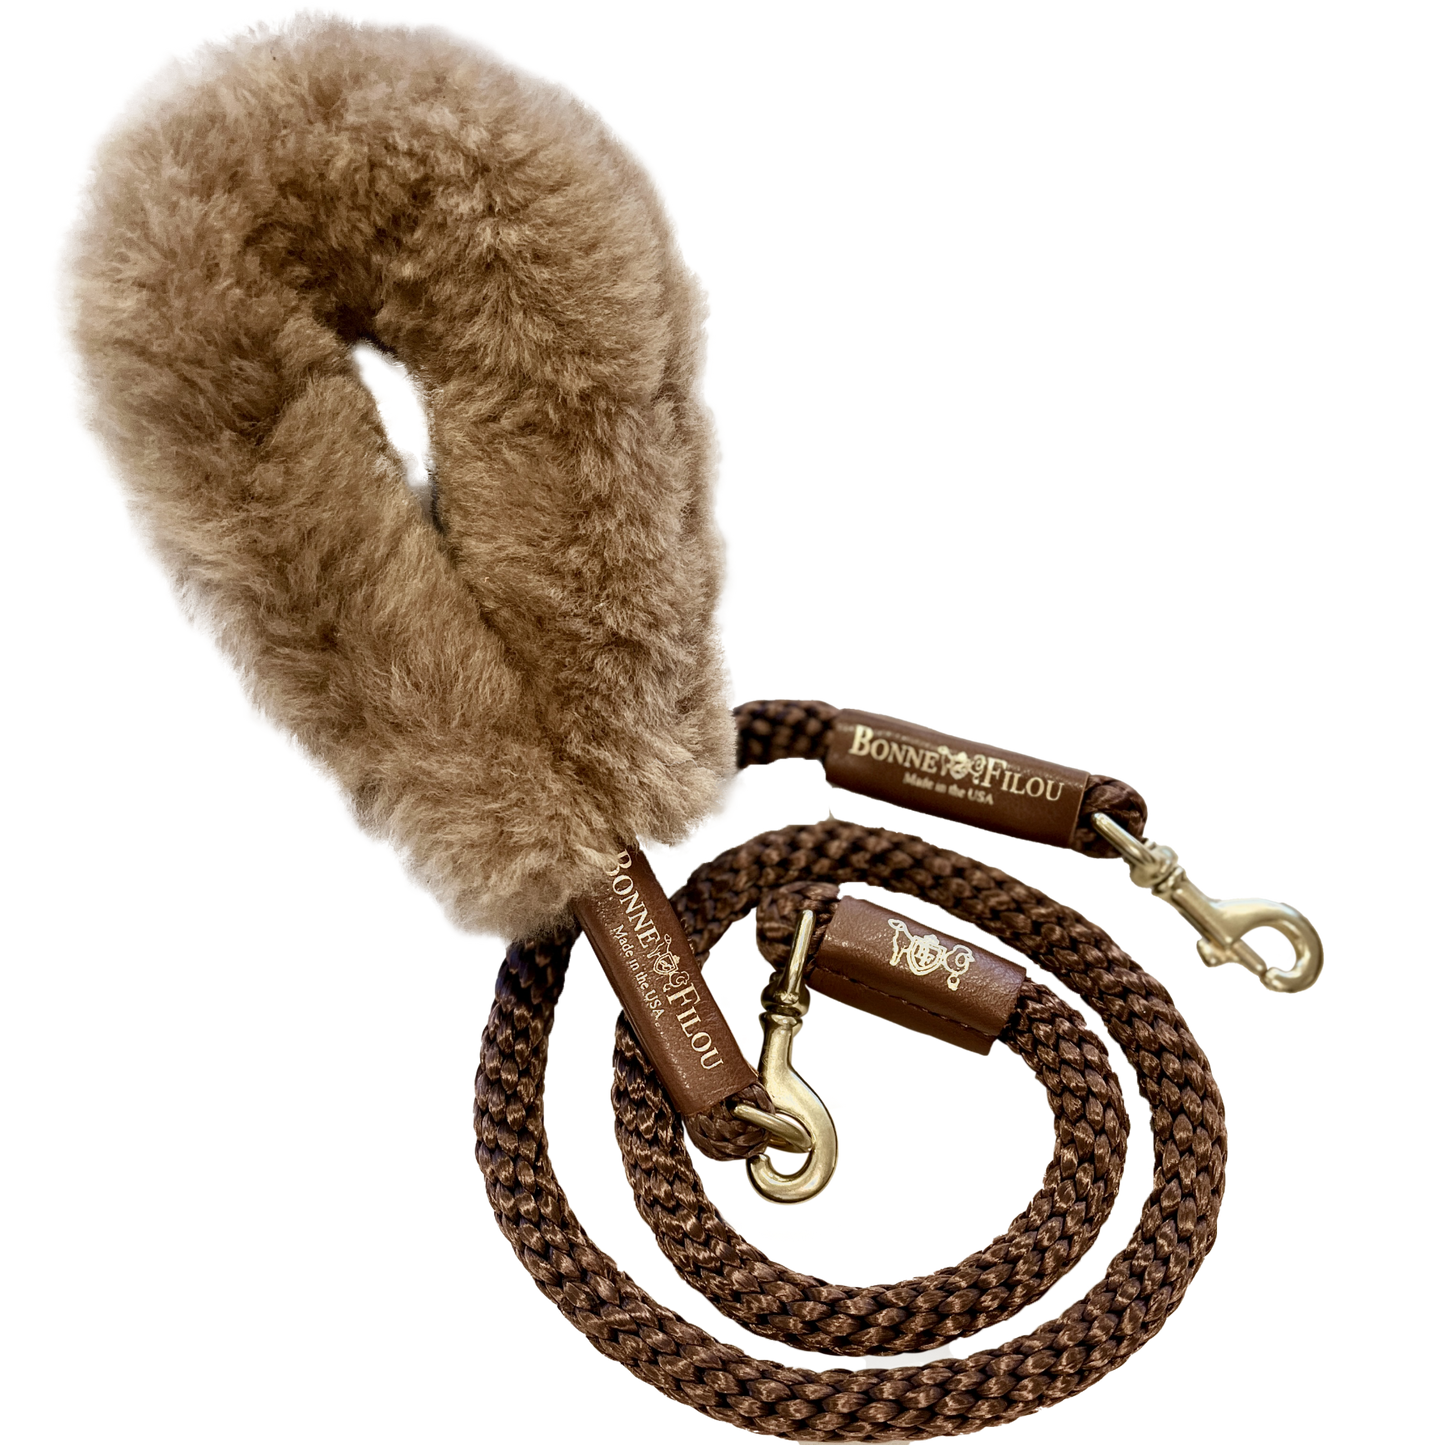 Bundle Shearling Fur Grip + Rope Leash for Dogs - Chic and Functional Dog Walking Accessory